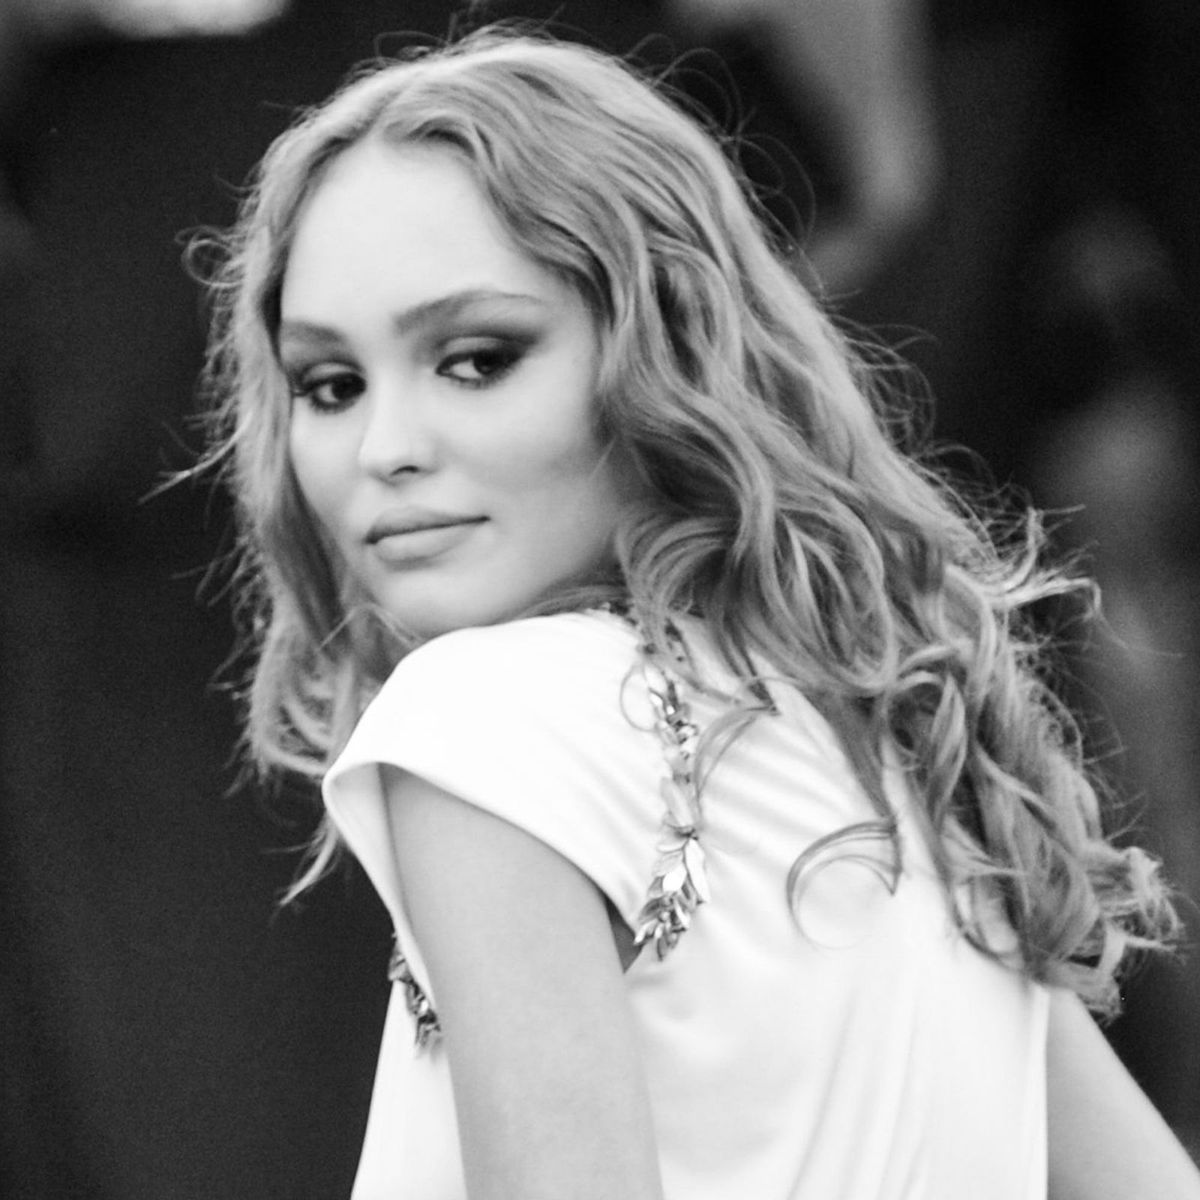 The exact products Lily-Rose Depp wore at the Cannes opening